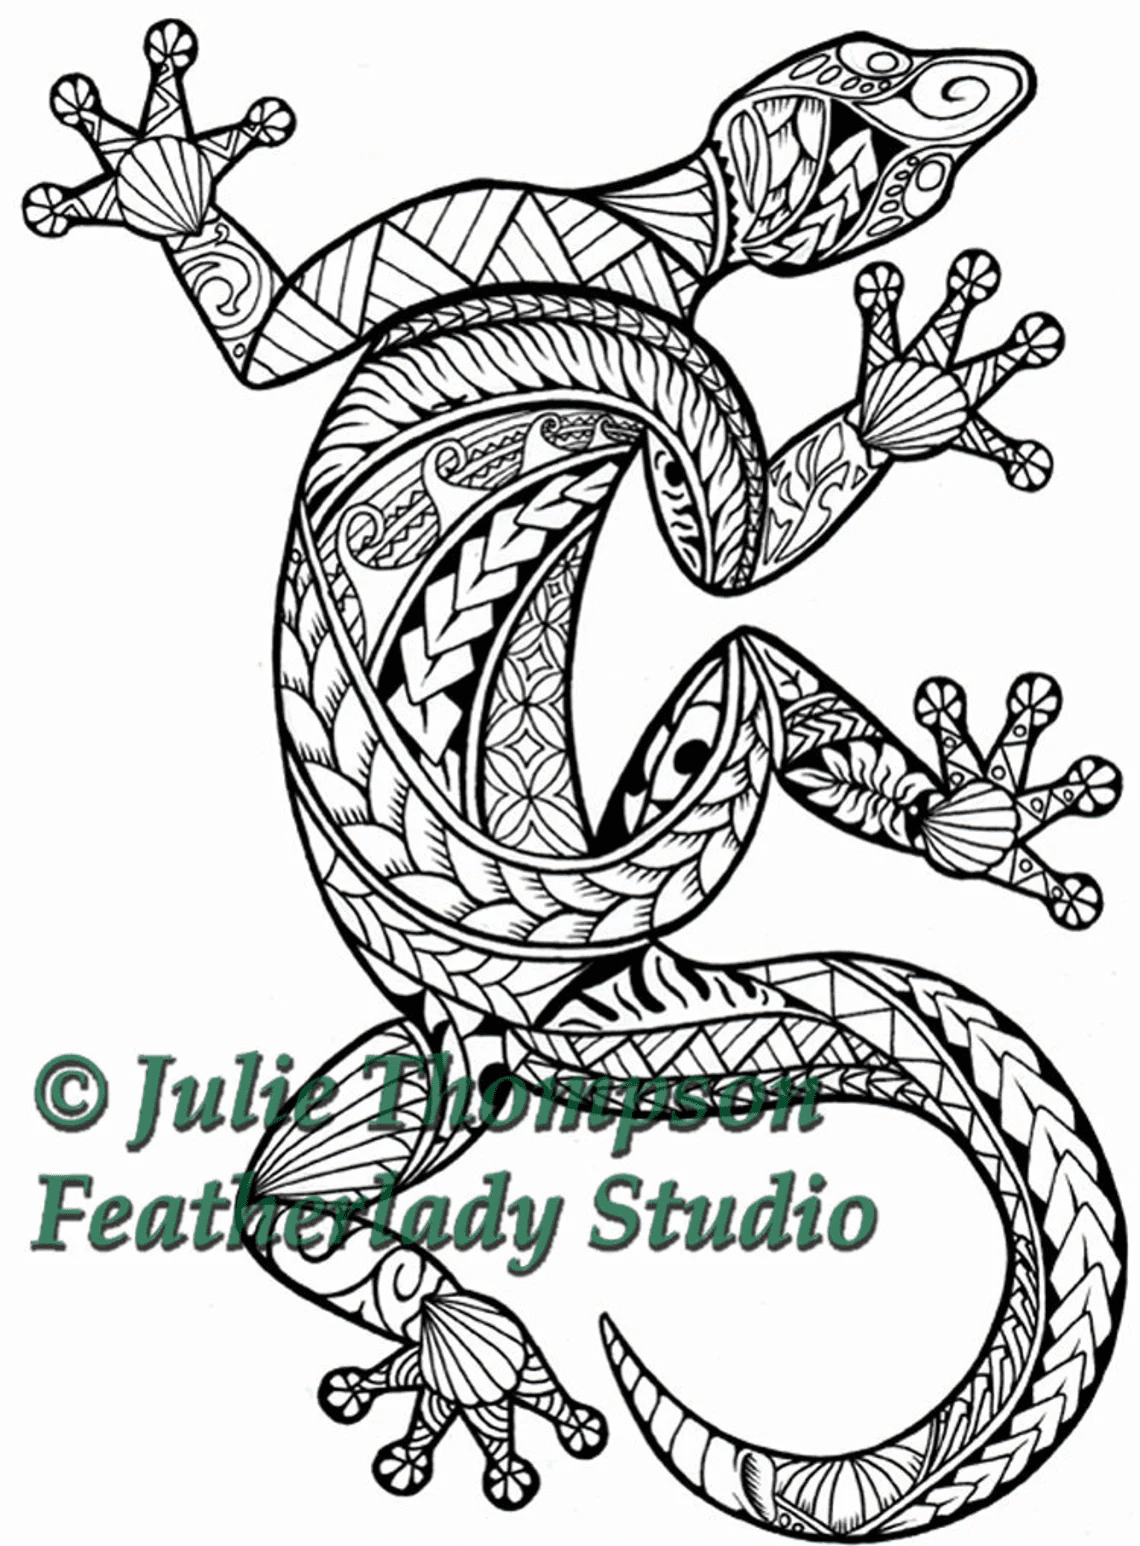 Gecko Cartoon Image Free Coloring Page